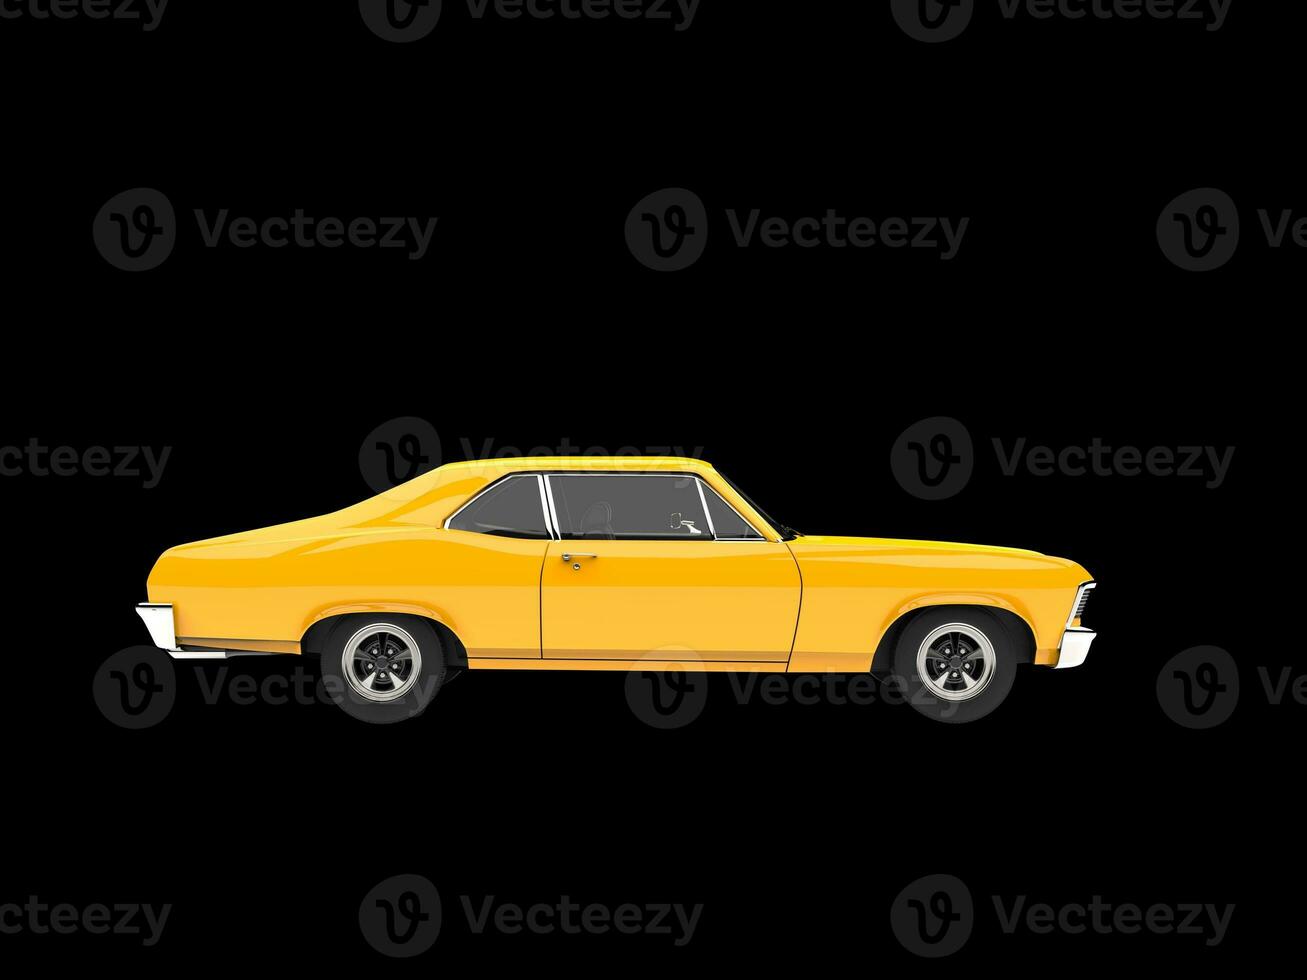 Cool vintage yellow muscle car - side view photo